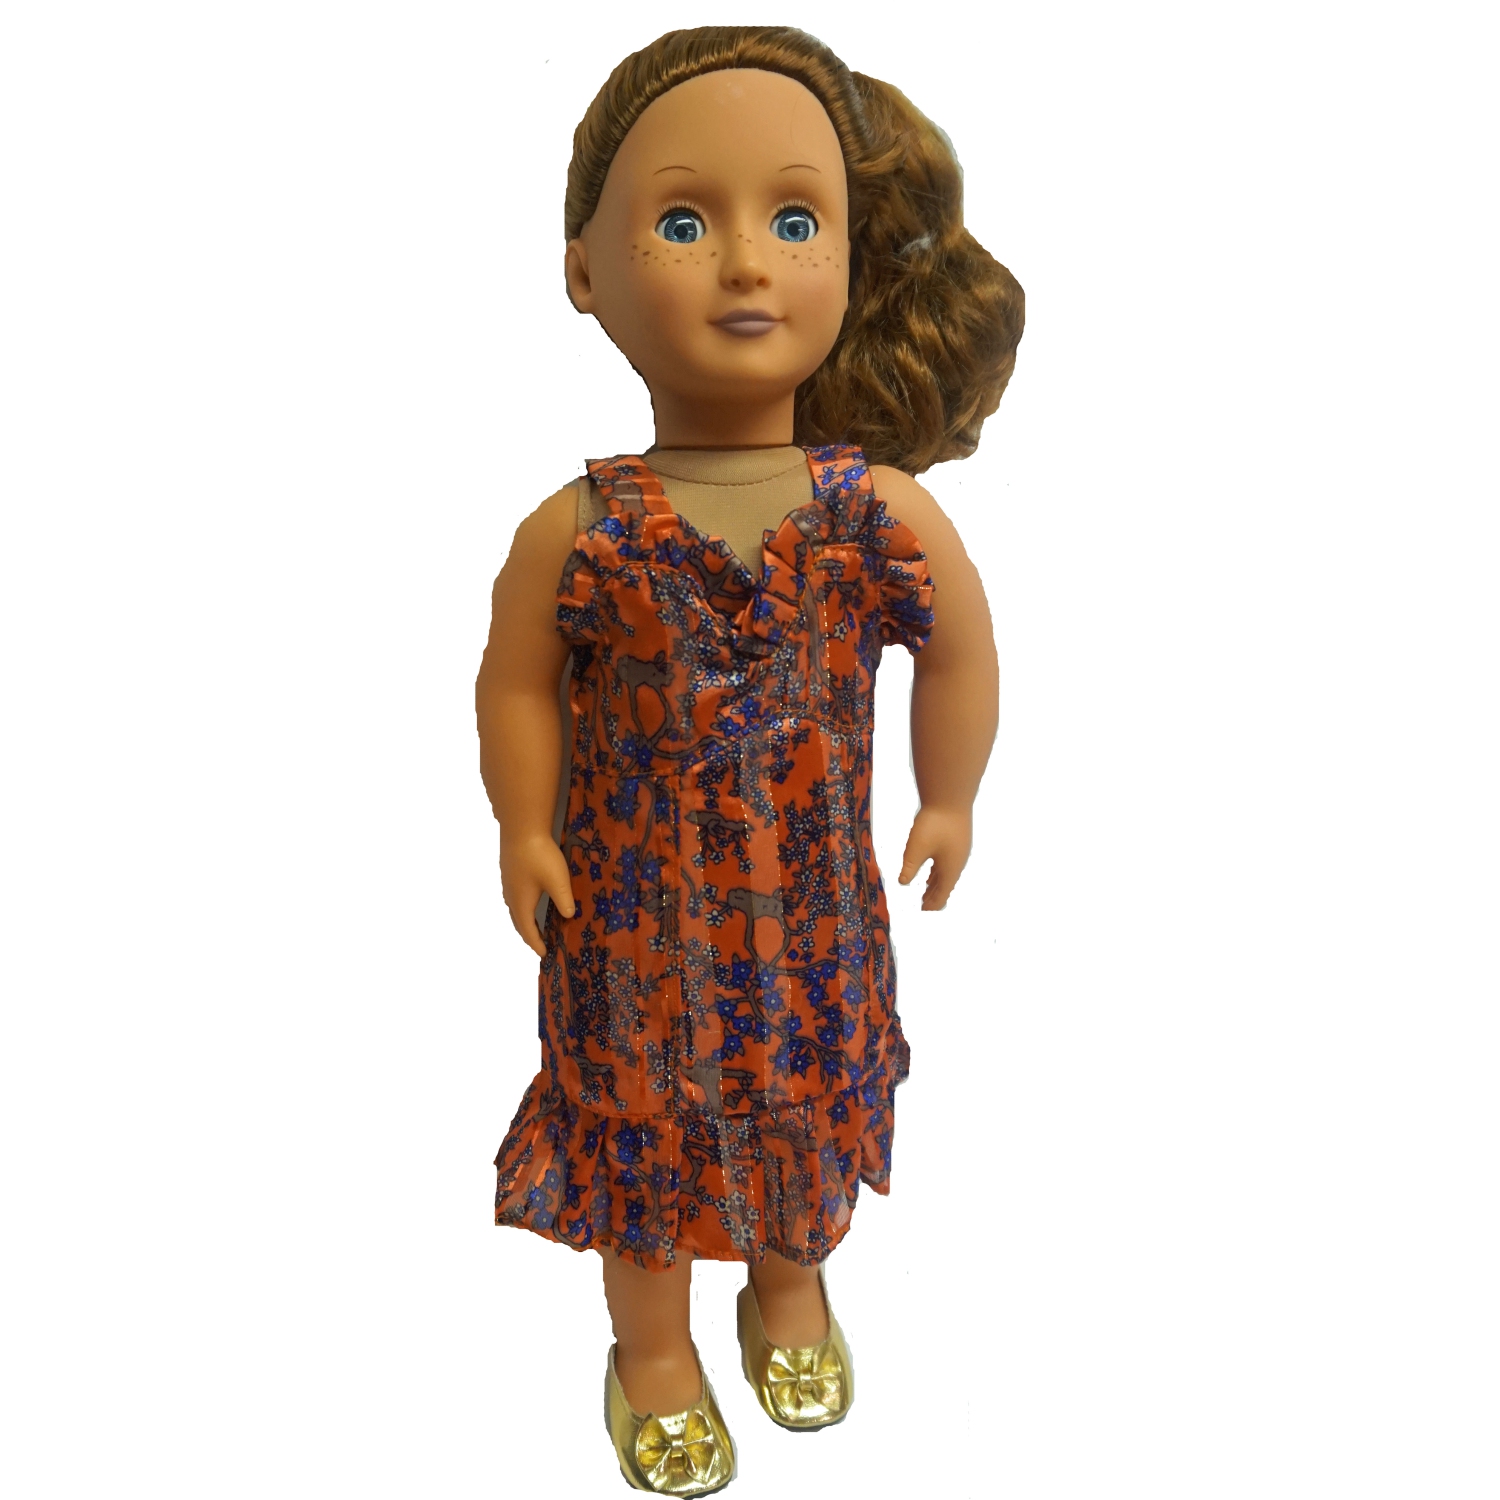 Doll Clothes Superstore Formal Sundress For 18 Inch Dolls Like American Girl Our Generation My Life Dolls